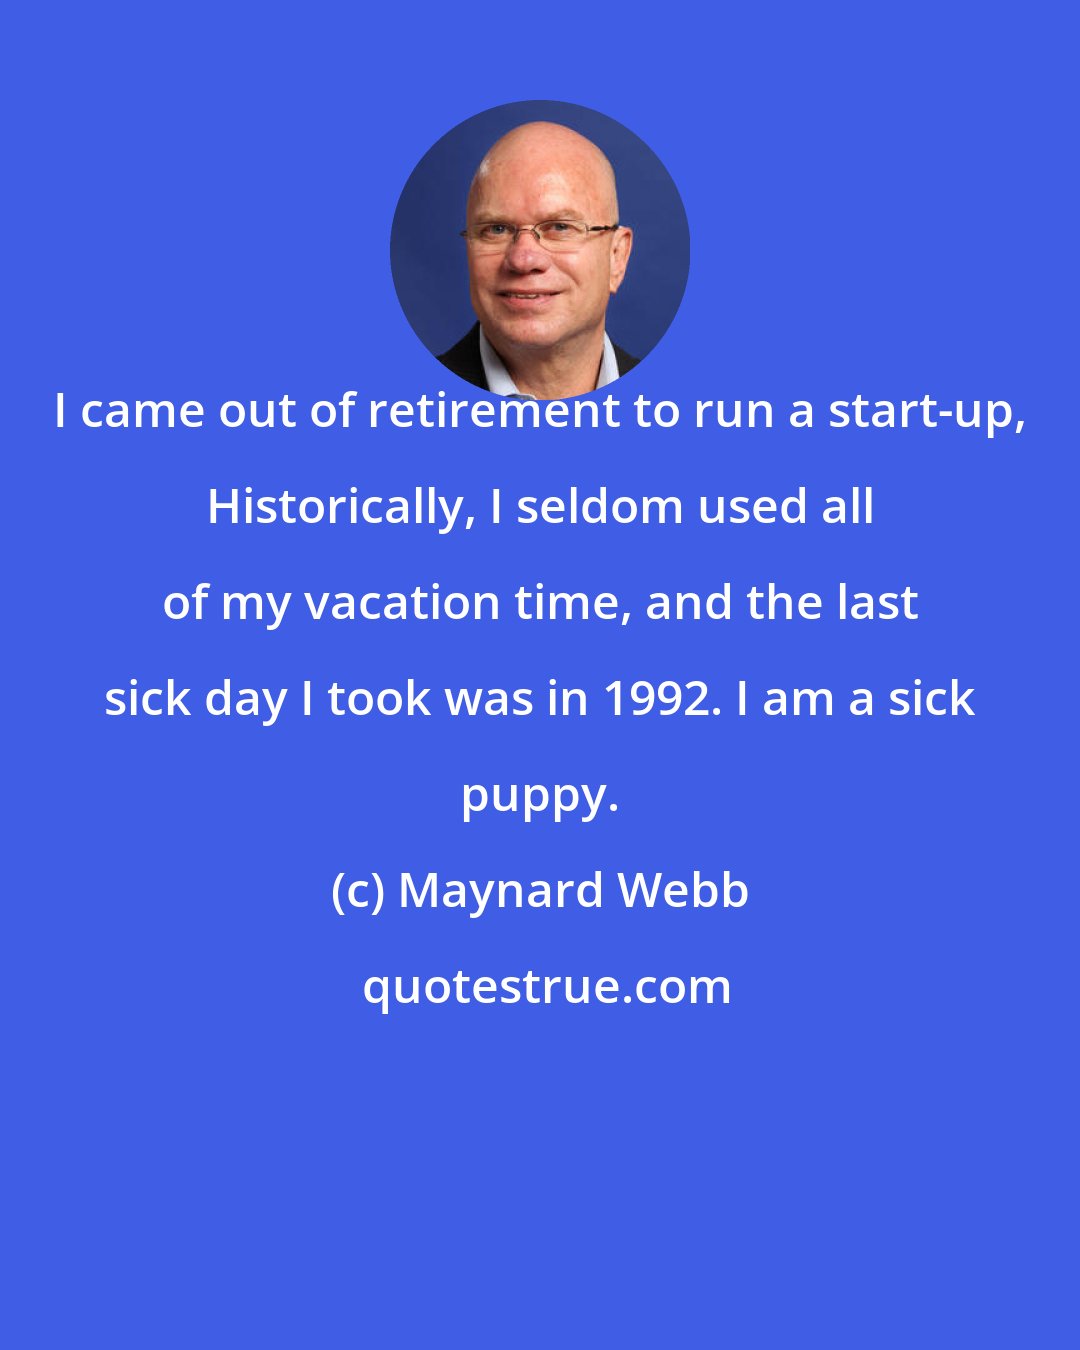 Maynard Webb: I came out of retirement to run a start-up, Historically, I seldom used all of my vacation time, and the last sick day I took was in 1992. I am a sick puppy.